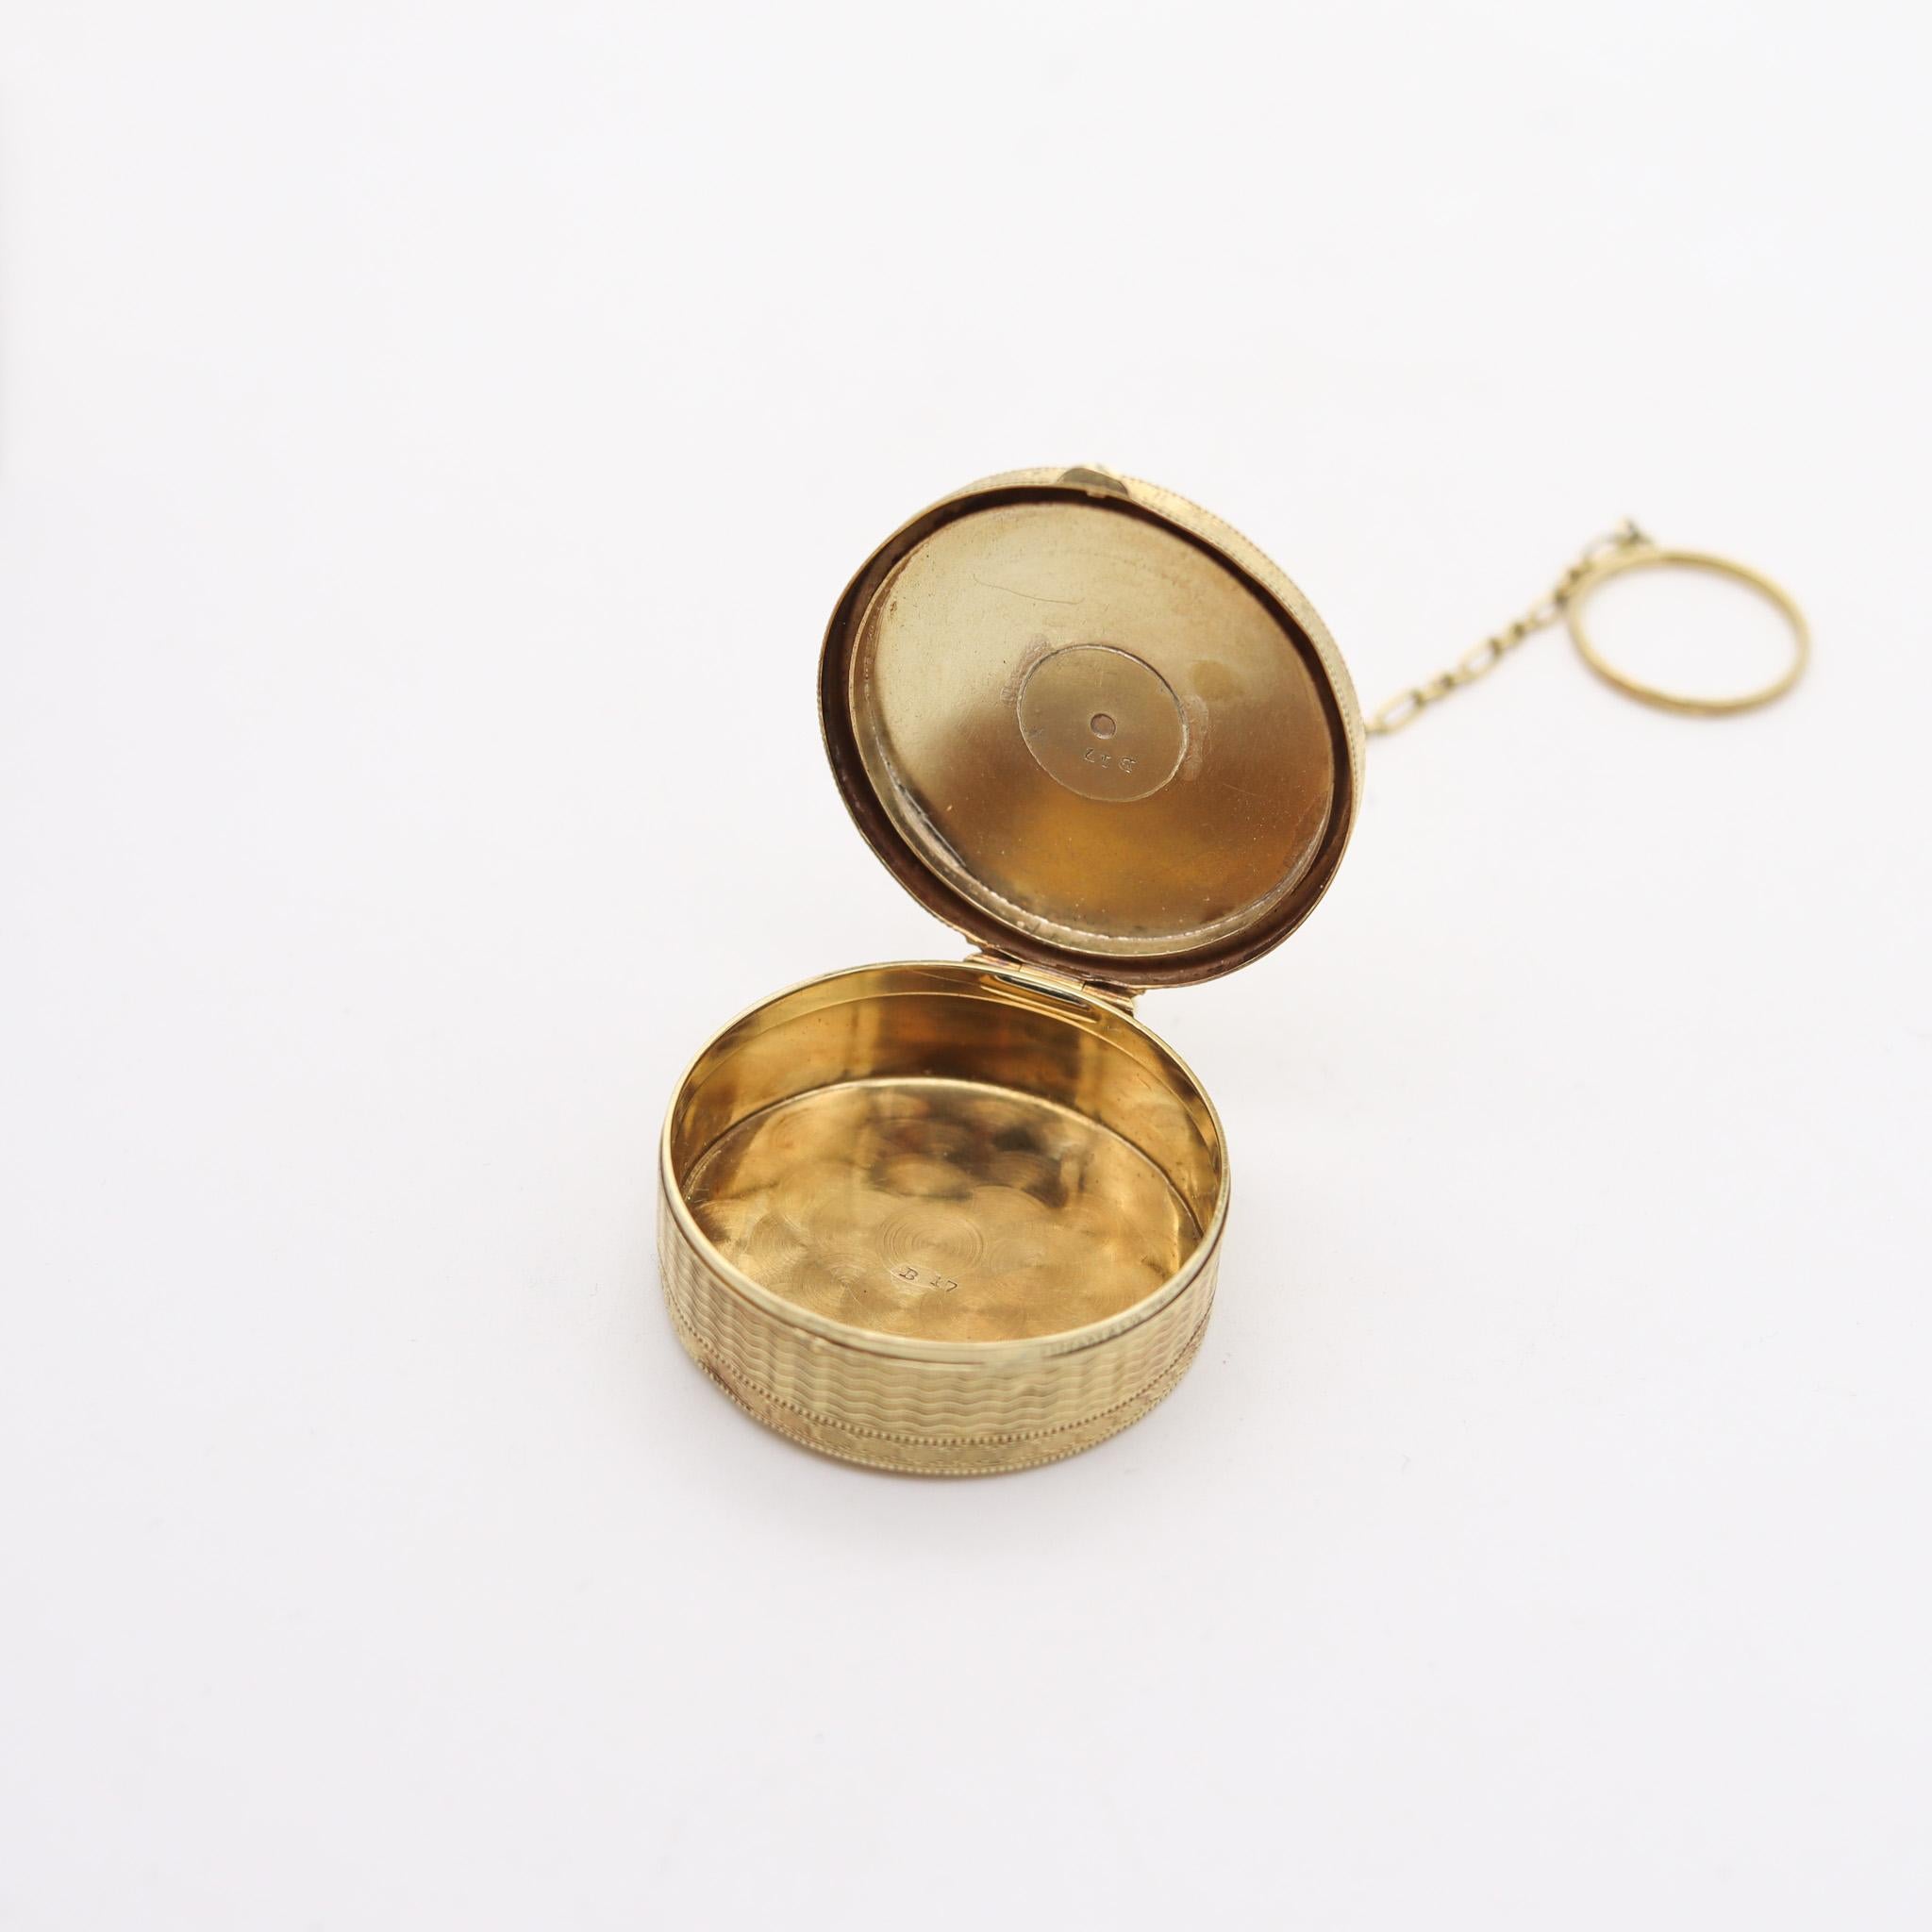 Tiffany & Co. 1910 Edwardian Guilloché Round Pill Box In 14Kt Yellow Gold For Sale 1